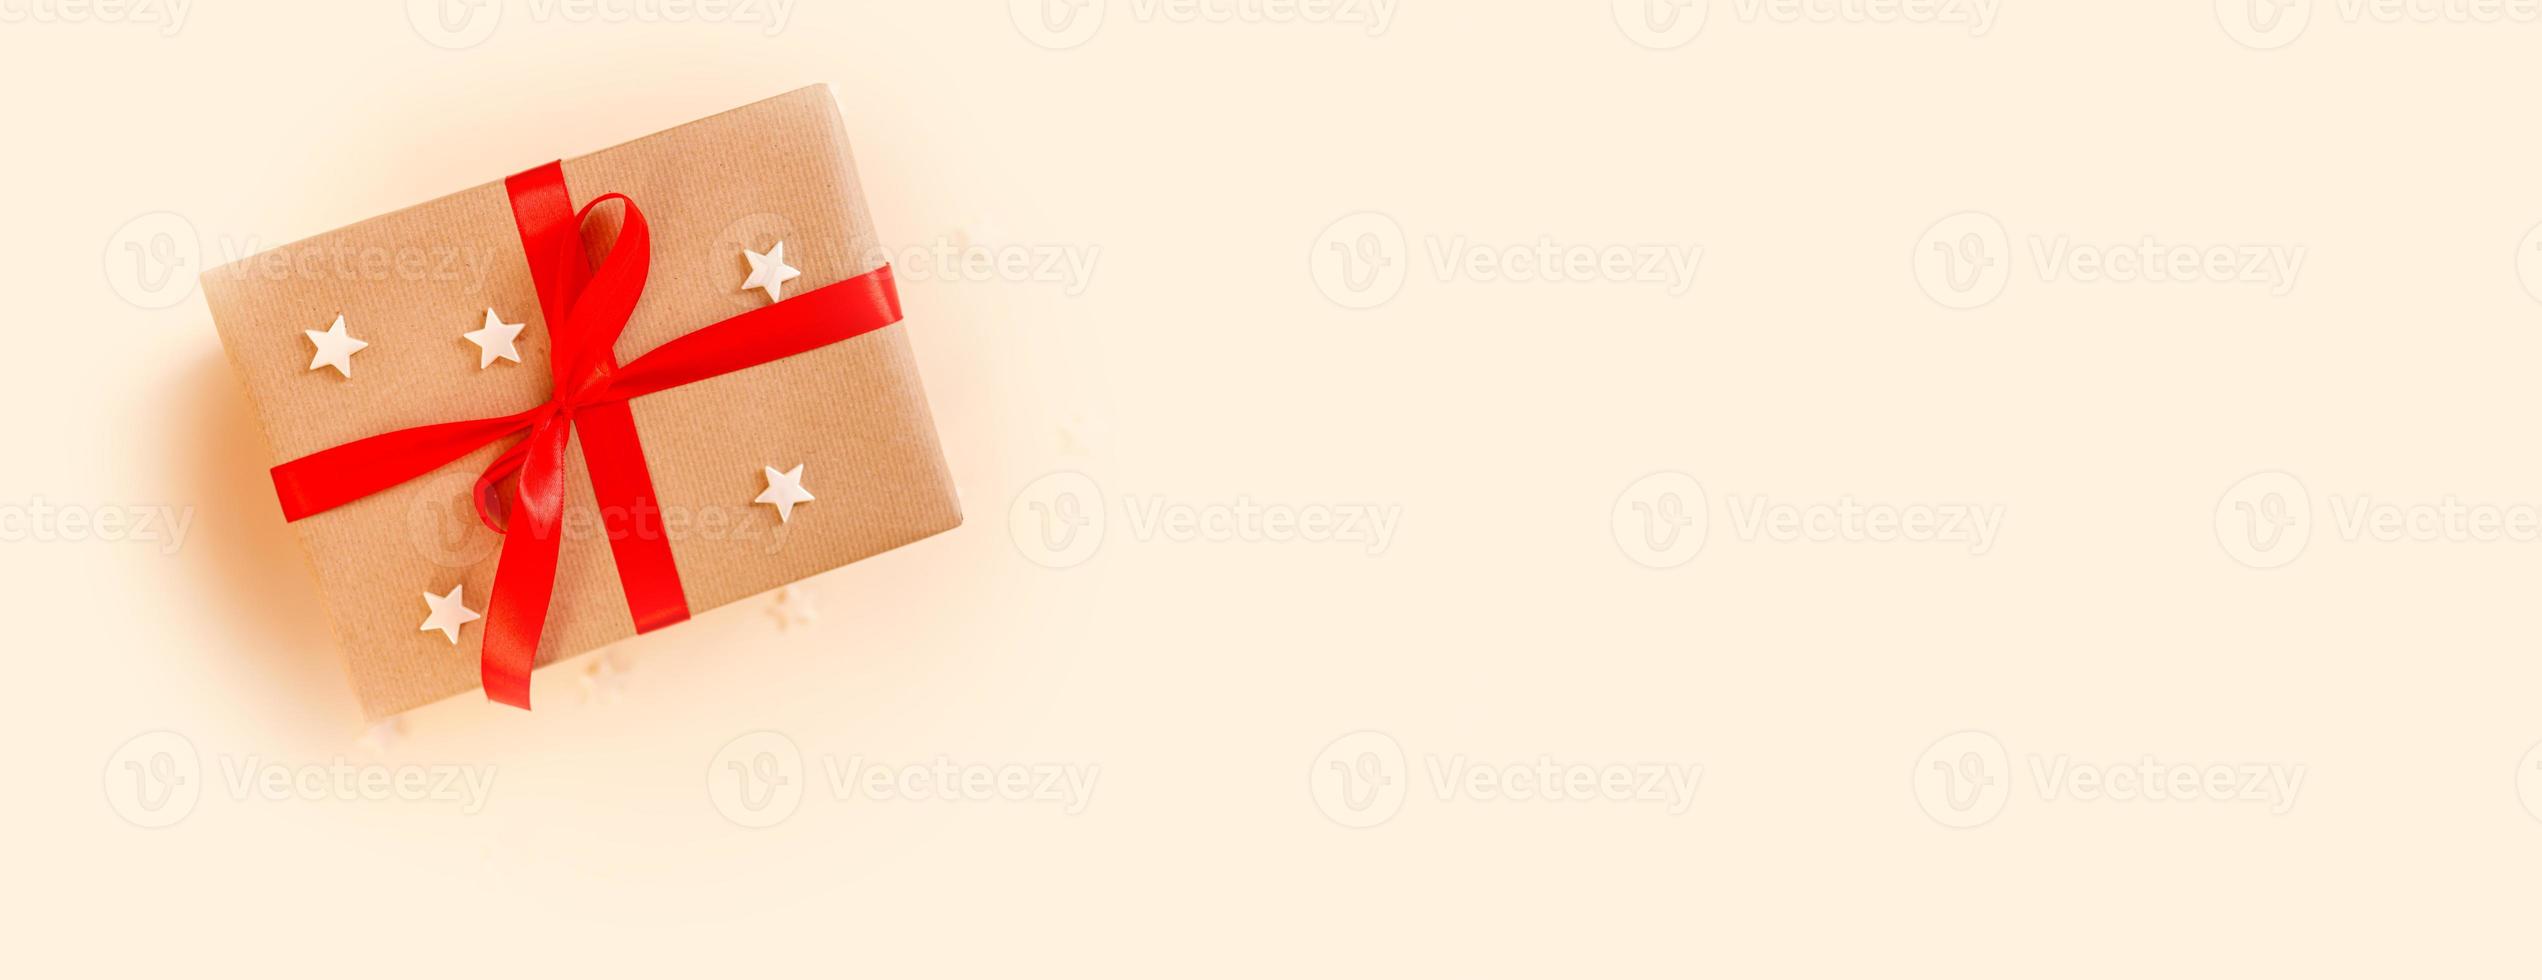 Christmas gift box with red bow on beige background. Holiday concept, New year presents. photo